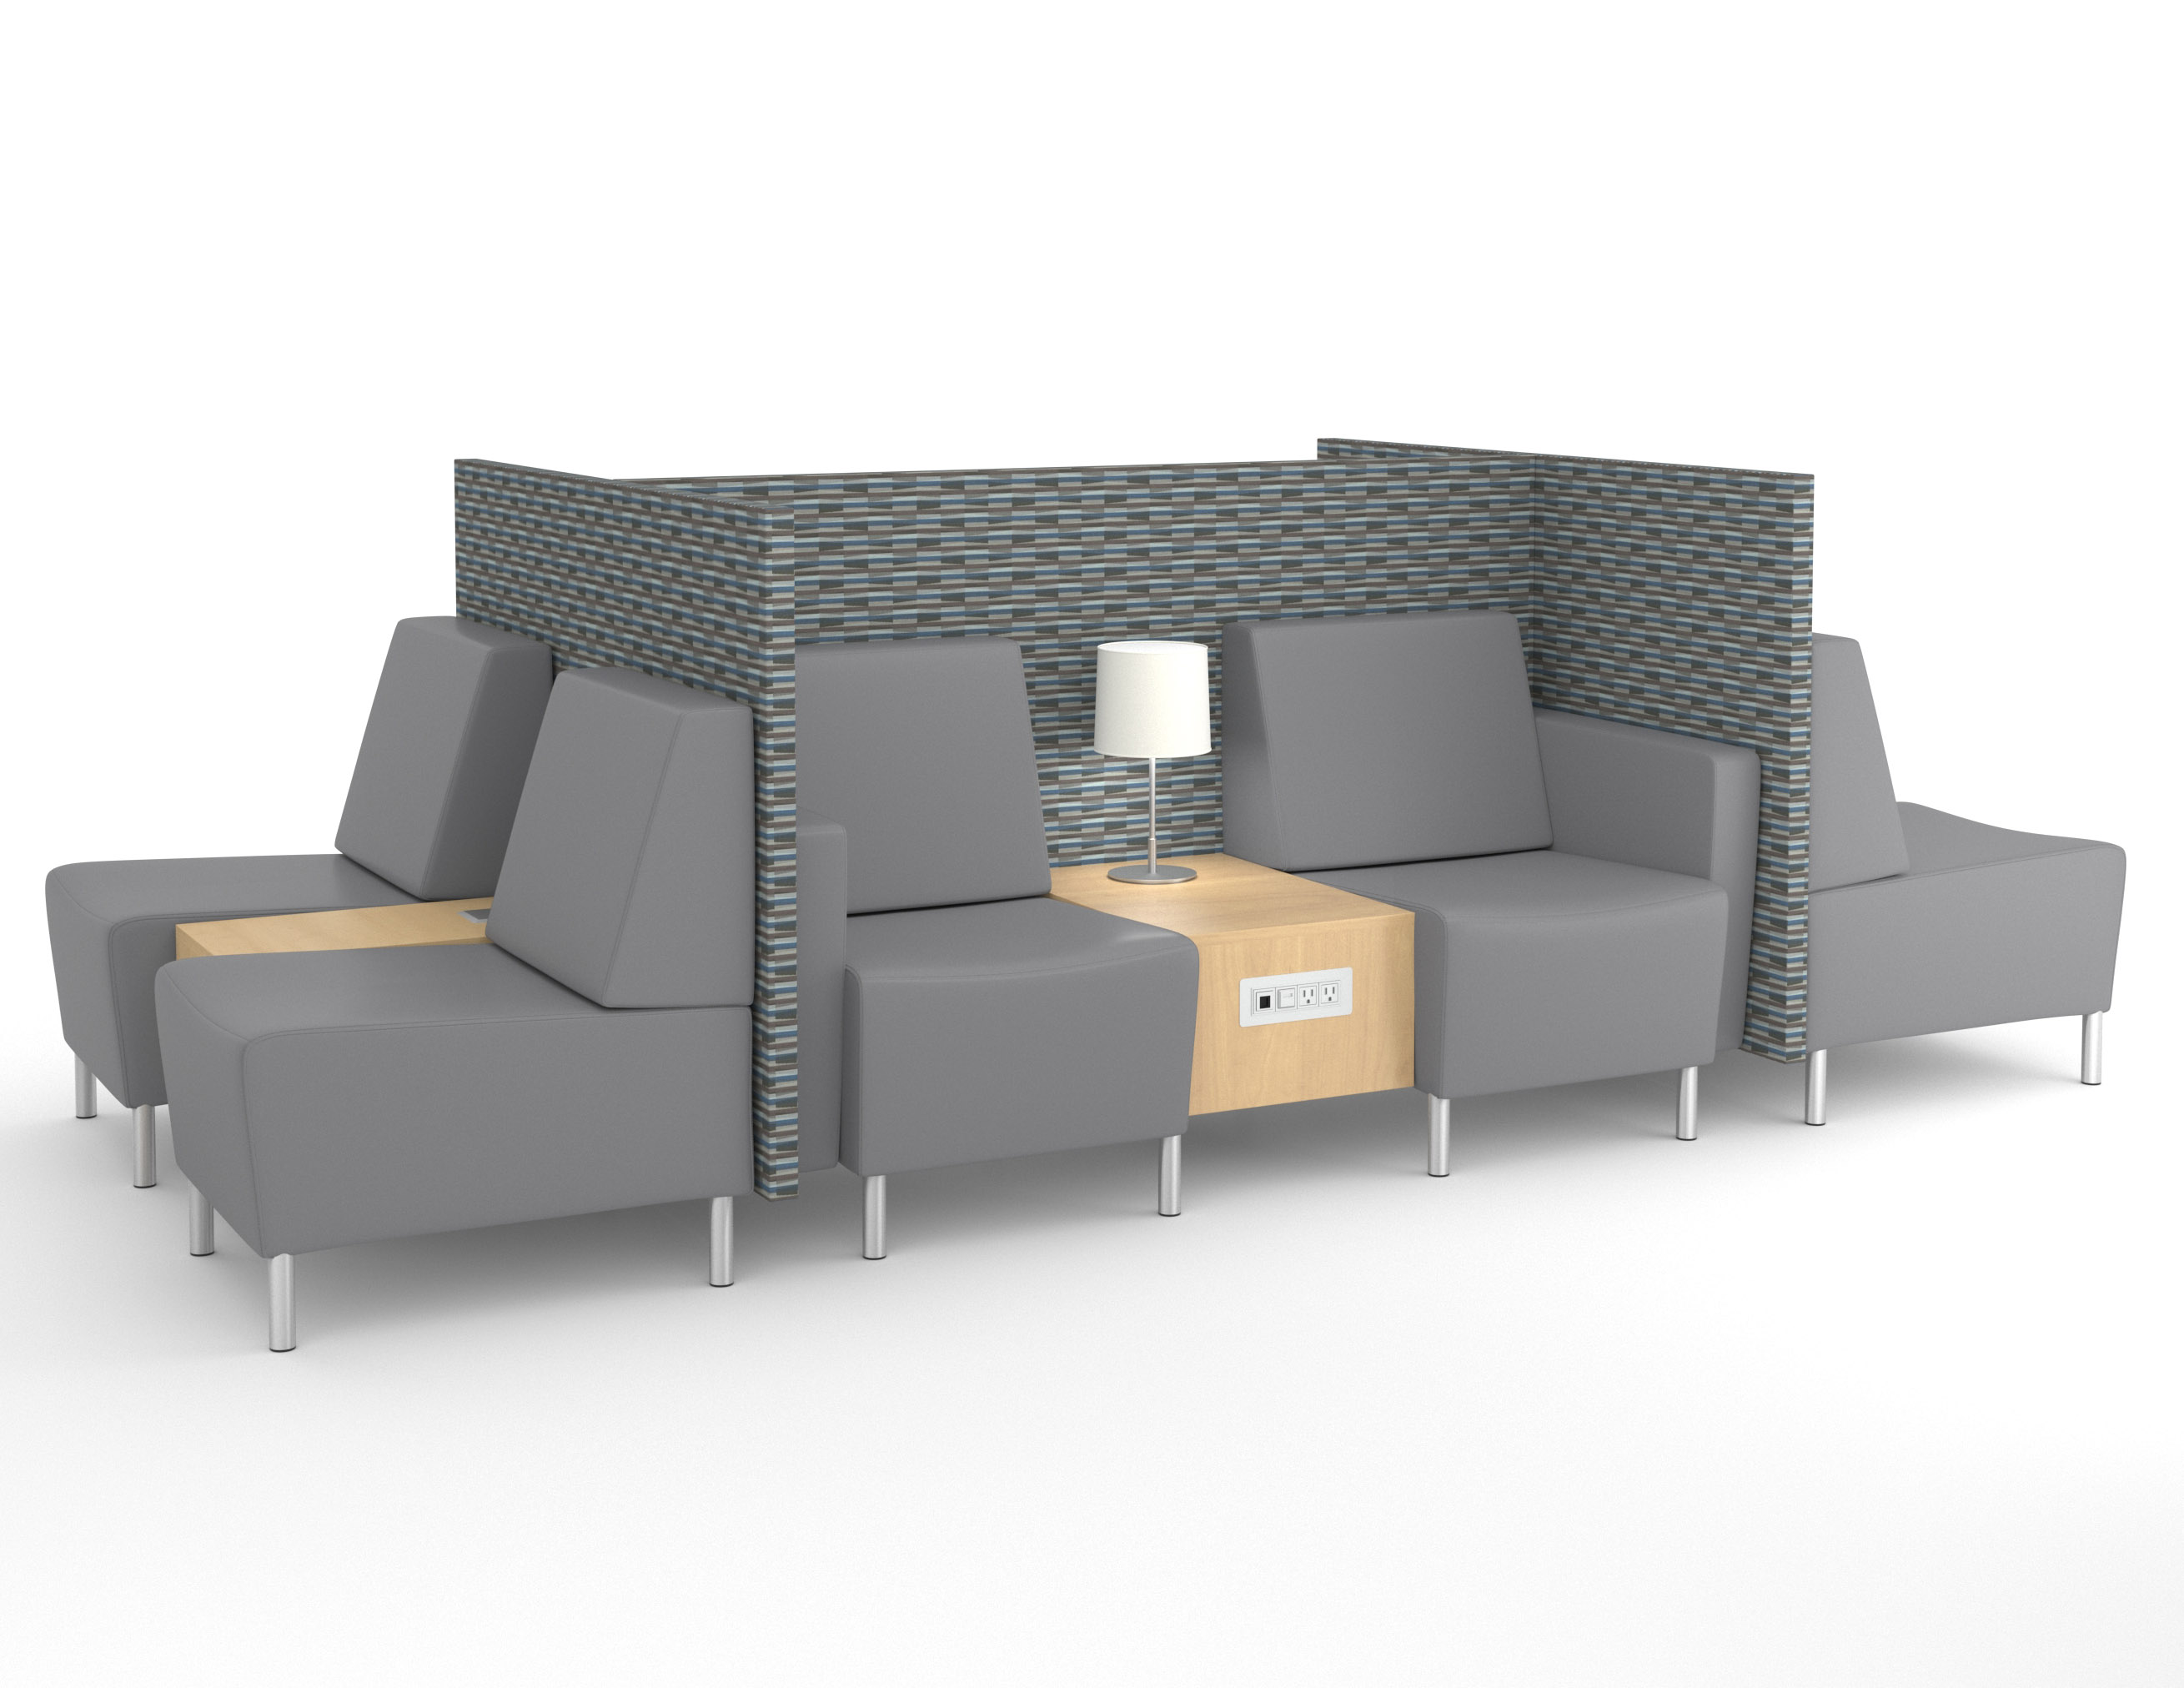 Modular lounge seating with privacy panels and powered tables for Public Library